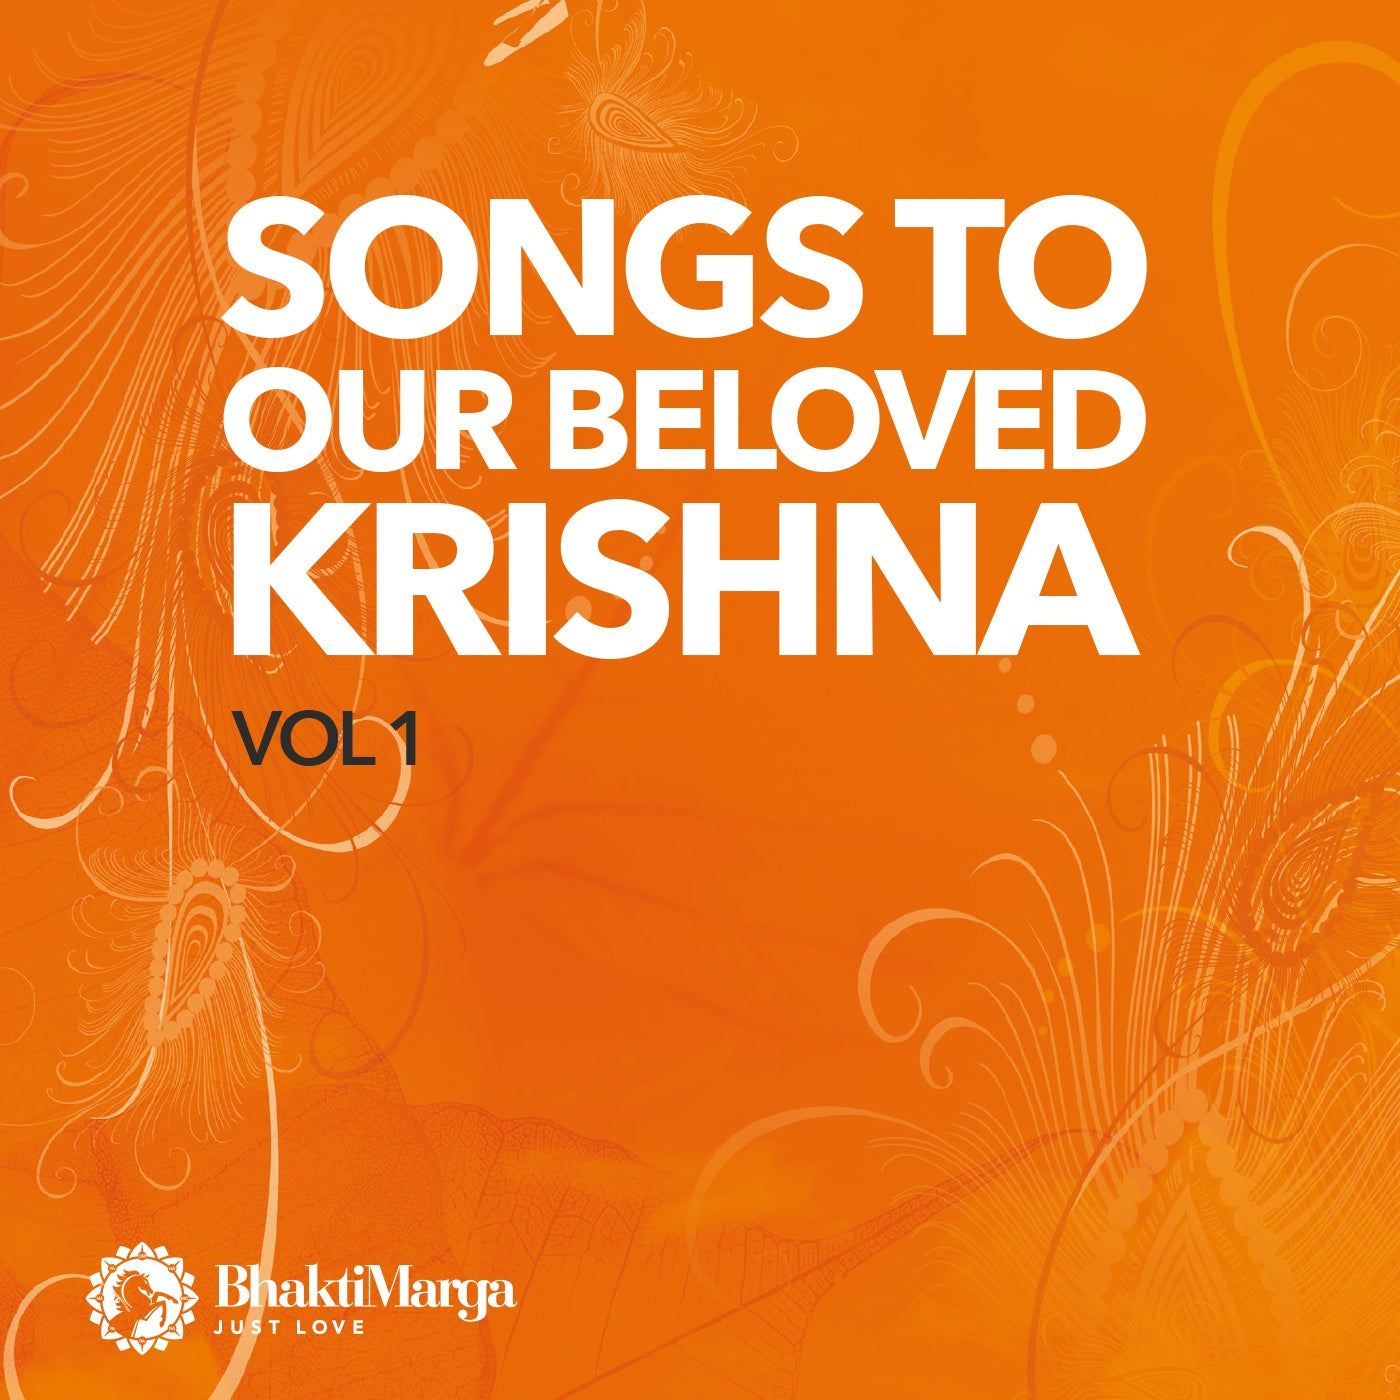 Song to Our Beloved Krishna vol.1